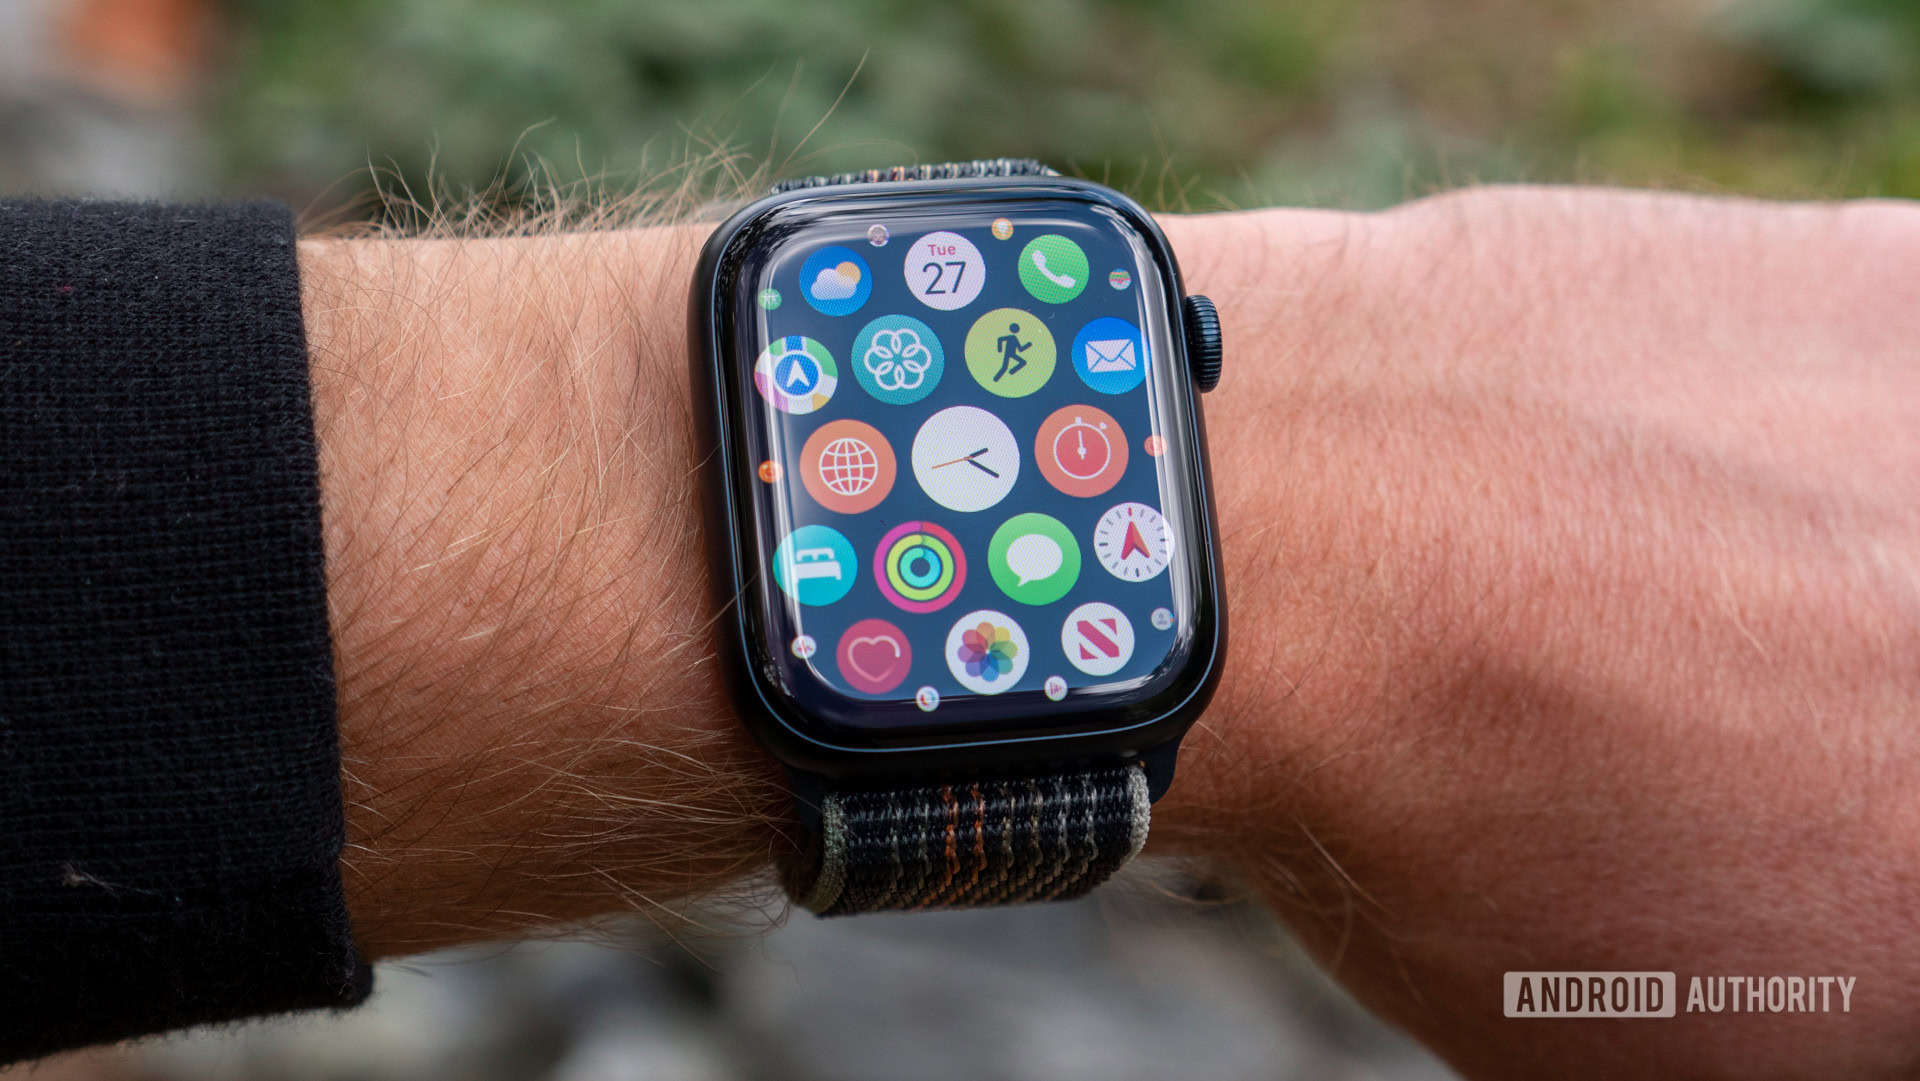 Apple Watch Series 8 price and offers: All the info you need before you buy